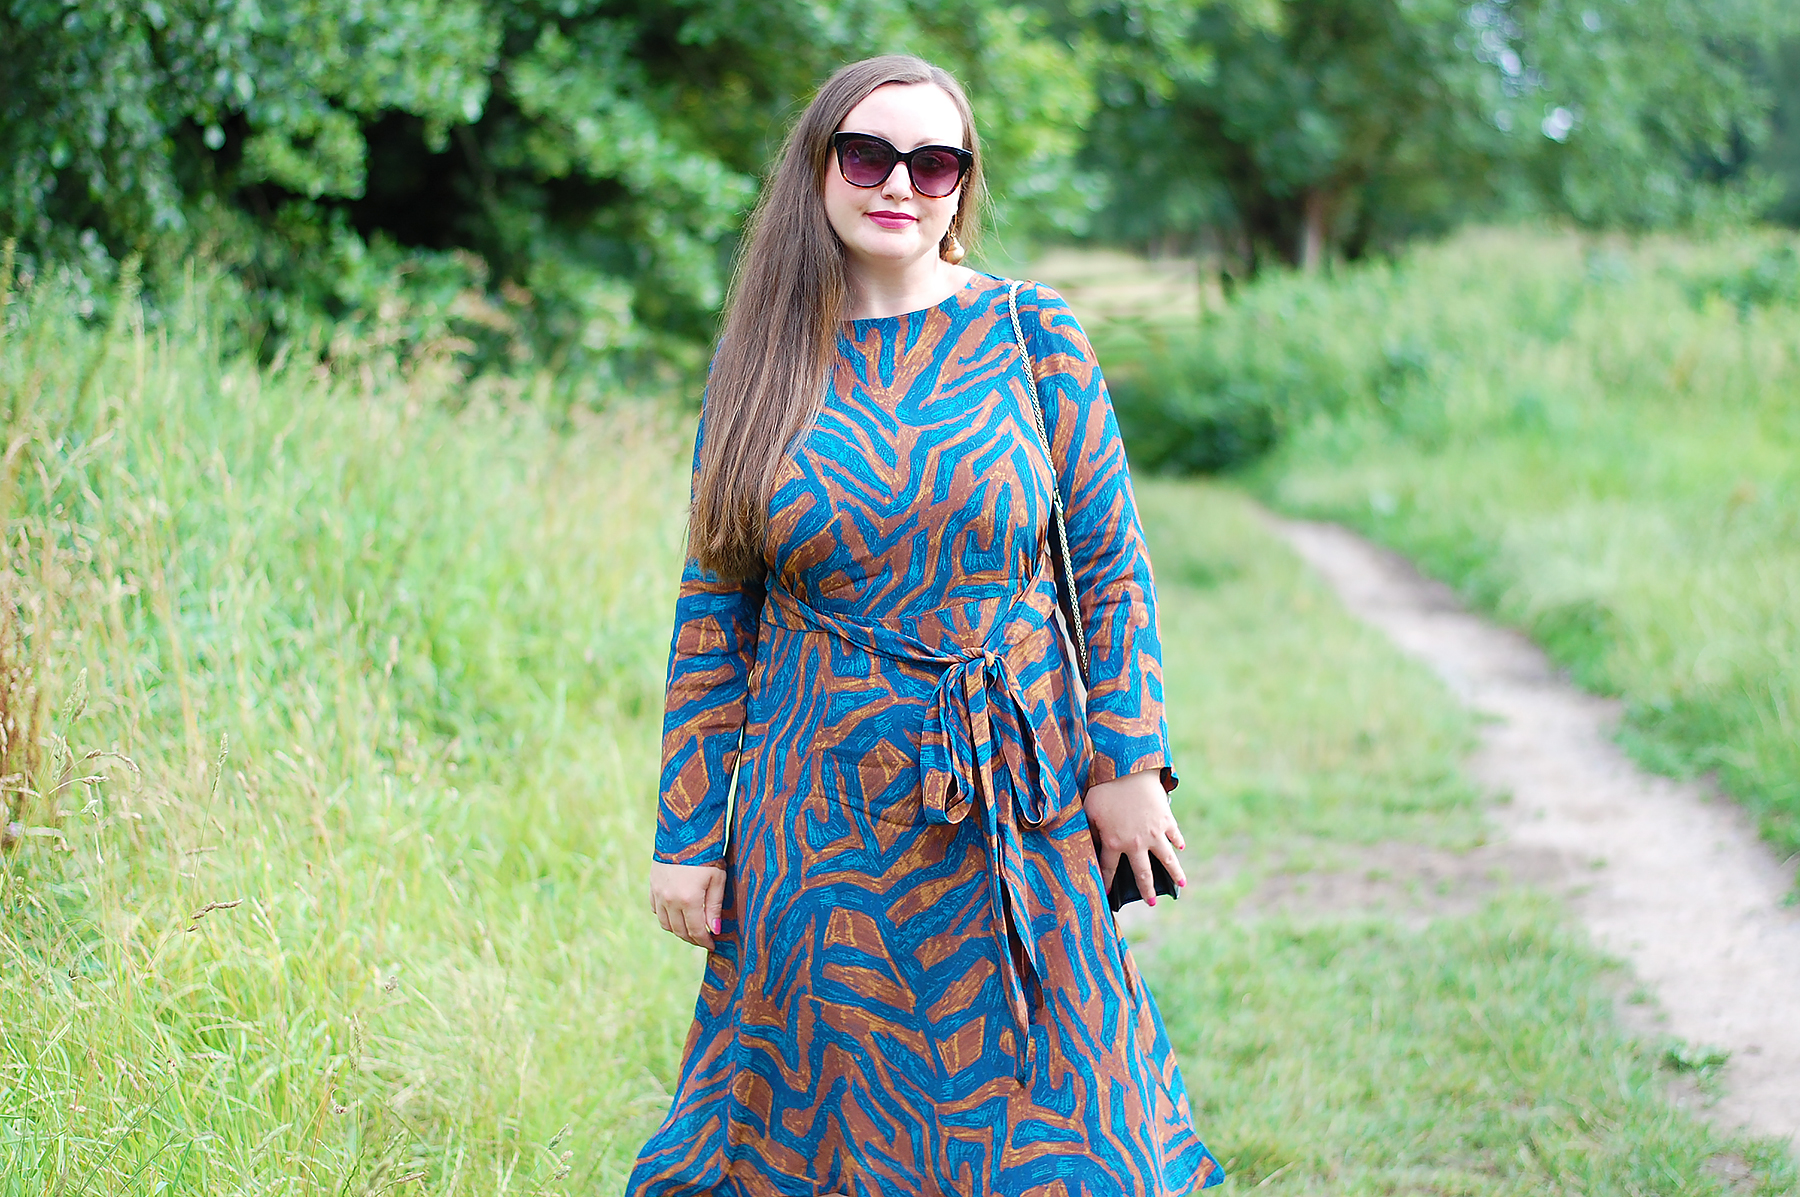 Vintage style tiger print dress outfit